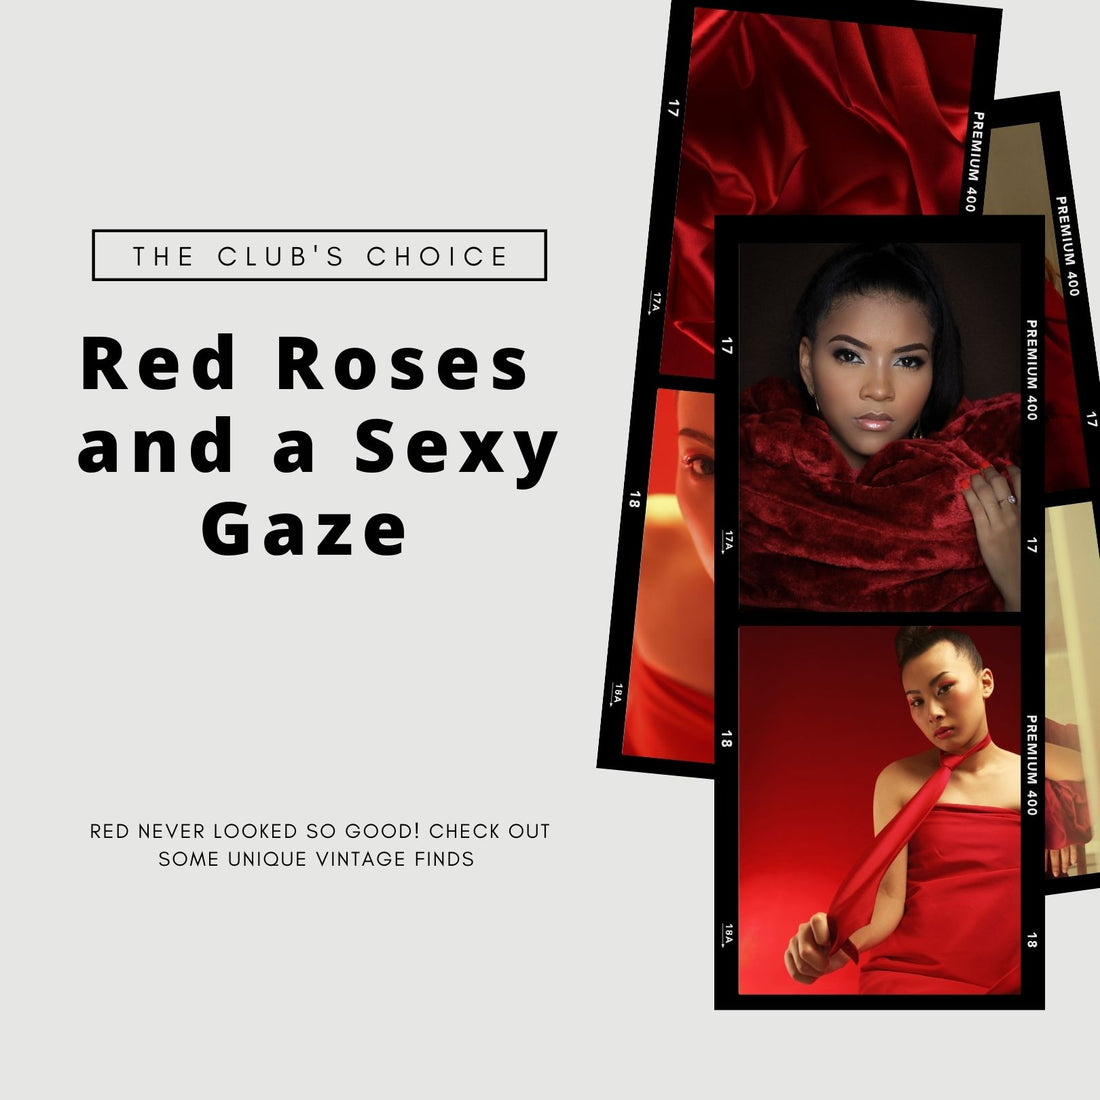 The Club's Choice: Red Roses and a Sexy Gaze